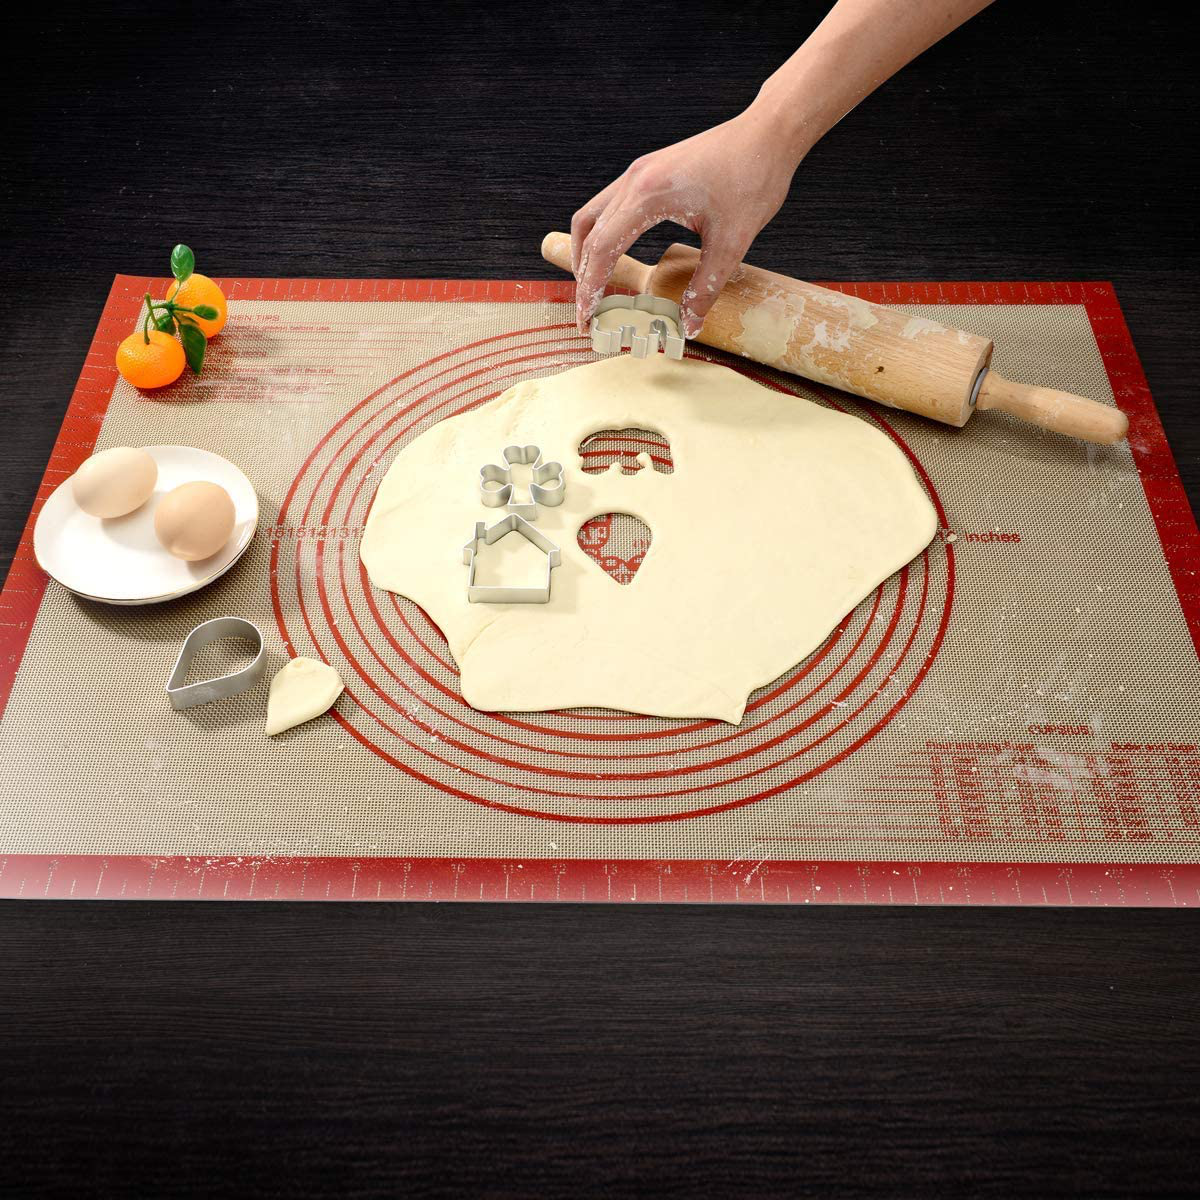 Non-Slip Silicone Pastry Mat Extra Large with Measurements 36''By 24'' for Silicone Baking Mat, Counter Mat, Dough Rolling Mat,Oven Liner,Fondant/Pie Crust Mat（Red）